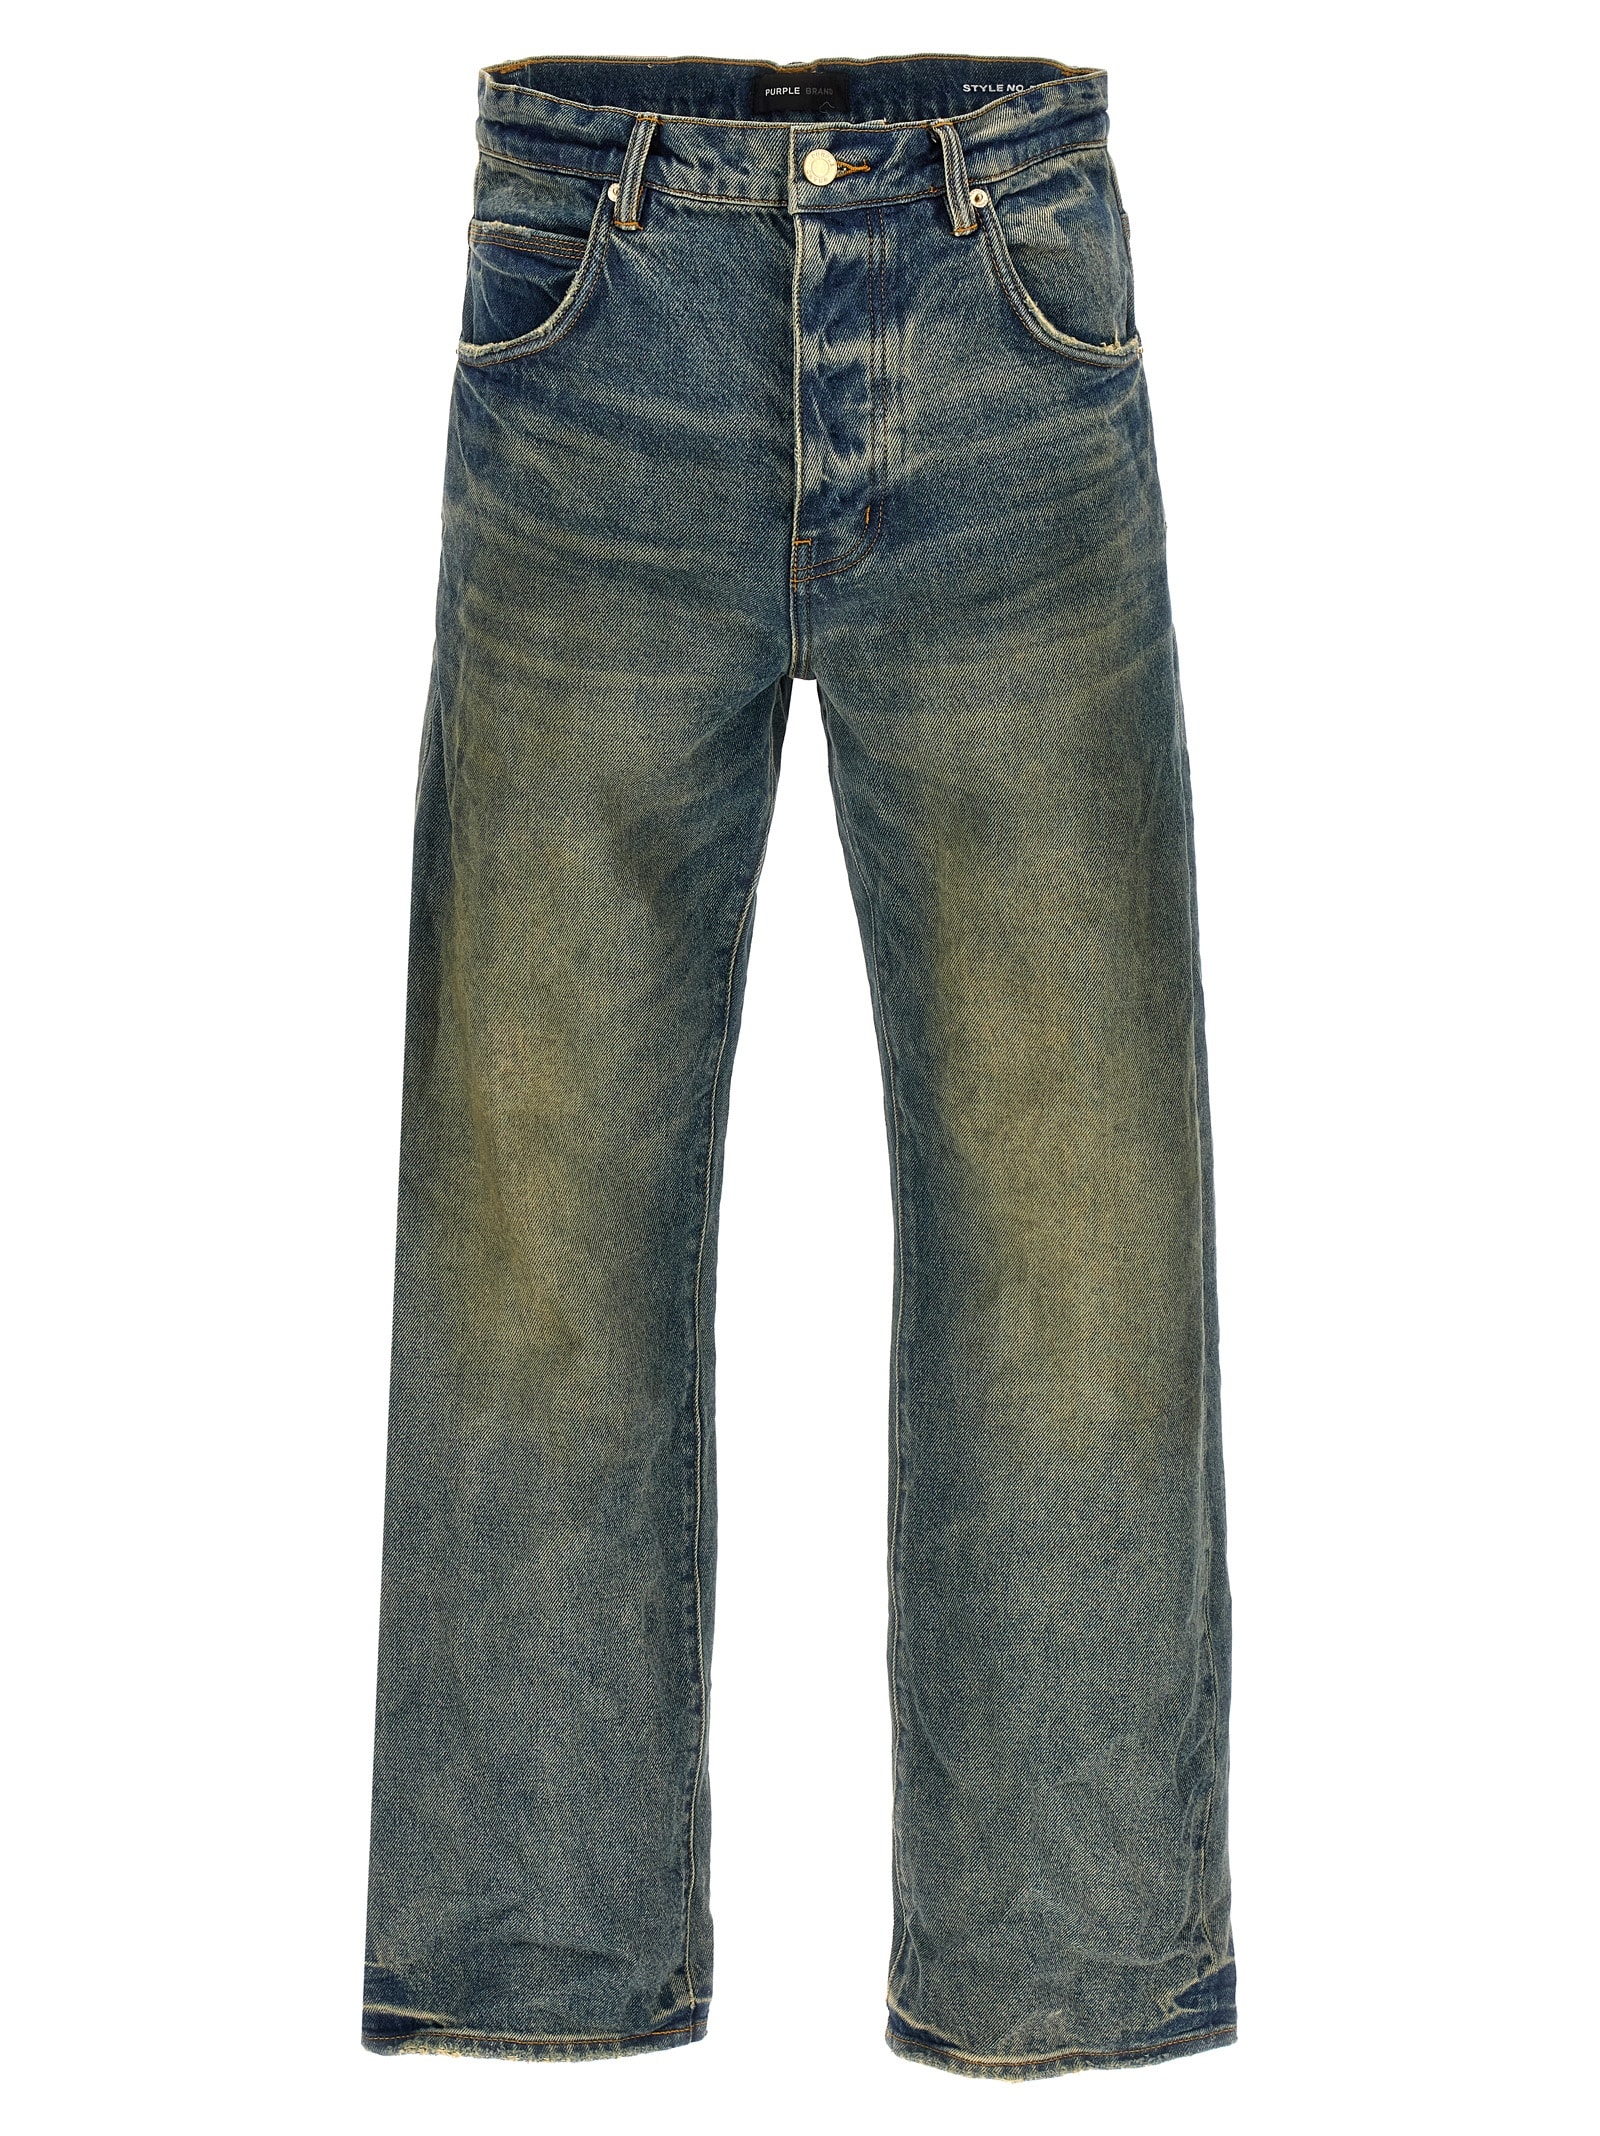 relaxed Vintage Dirty Jeans